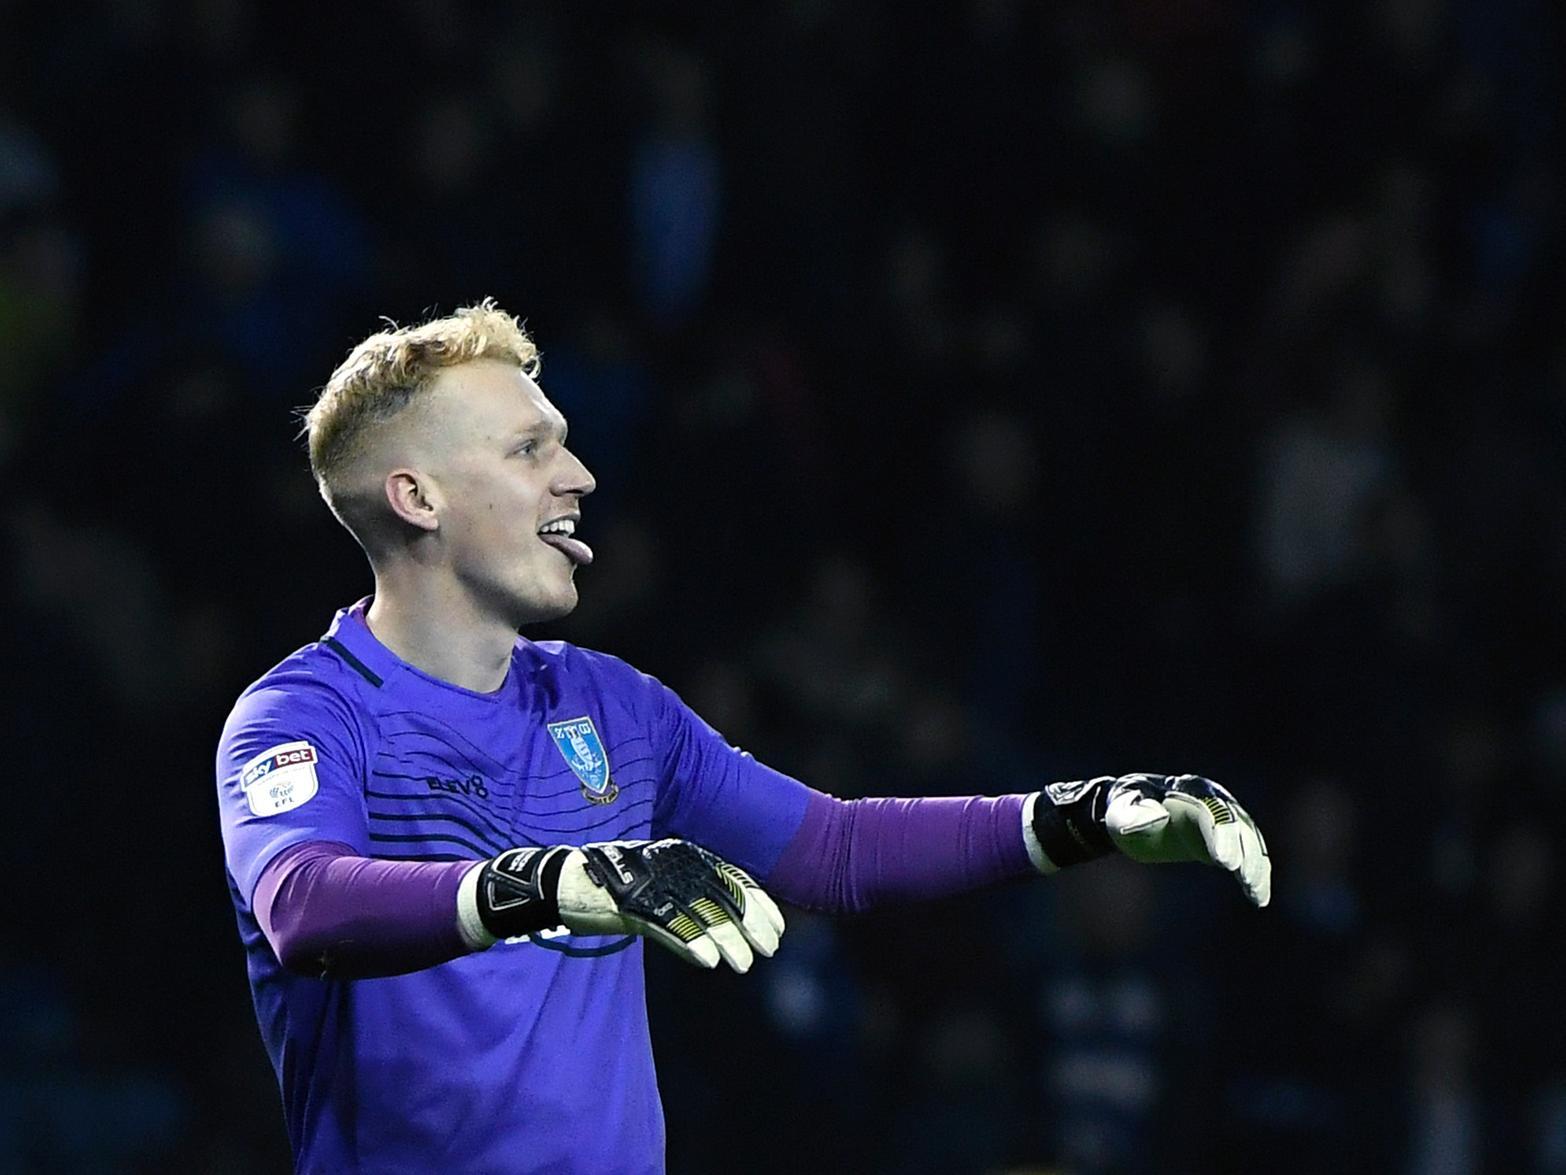 Rangers are said to be interested in signing Sheffield Wednesday goalkeeper Cameron Dawson, but could face stiff competition from the likes of Preston North End and Blackburn Rovers. (Sheffield Star)